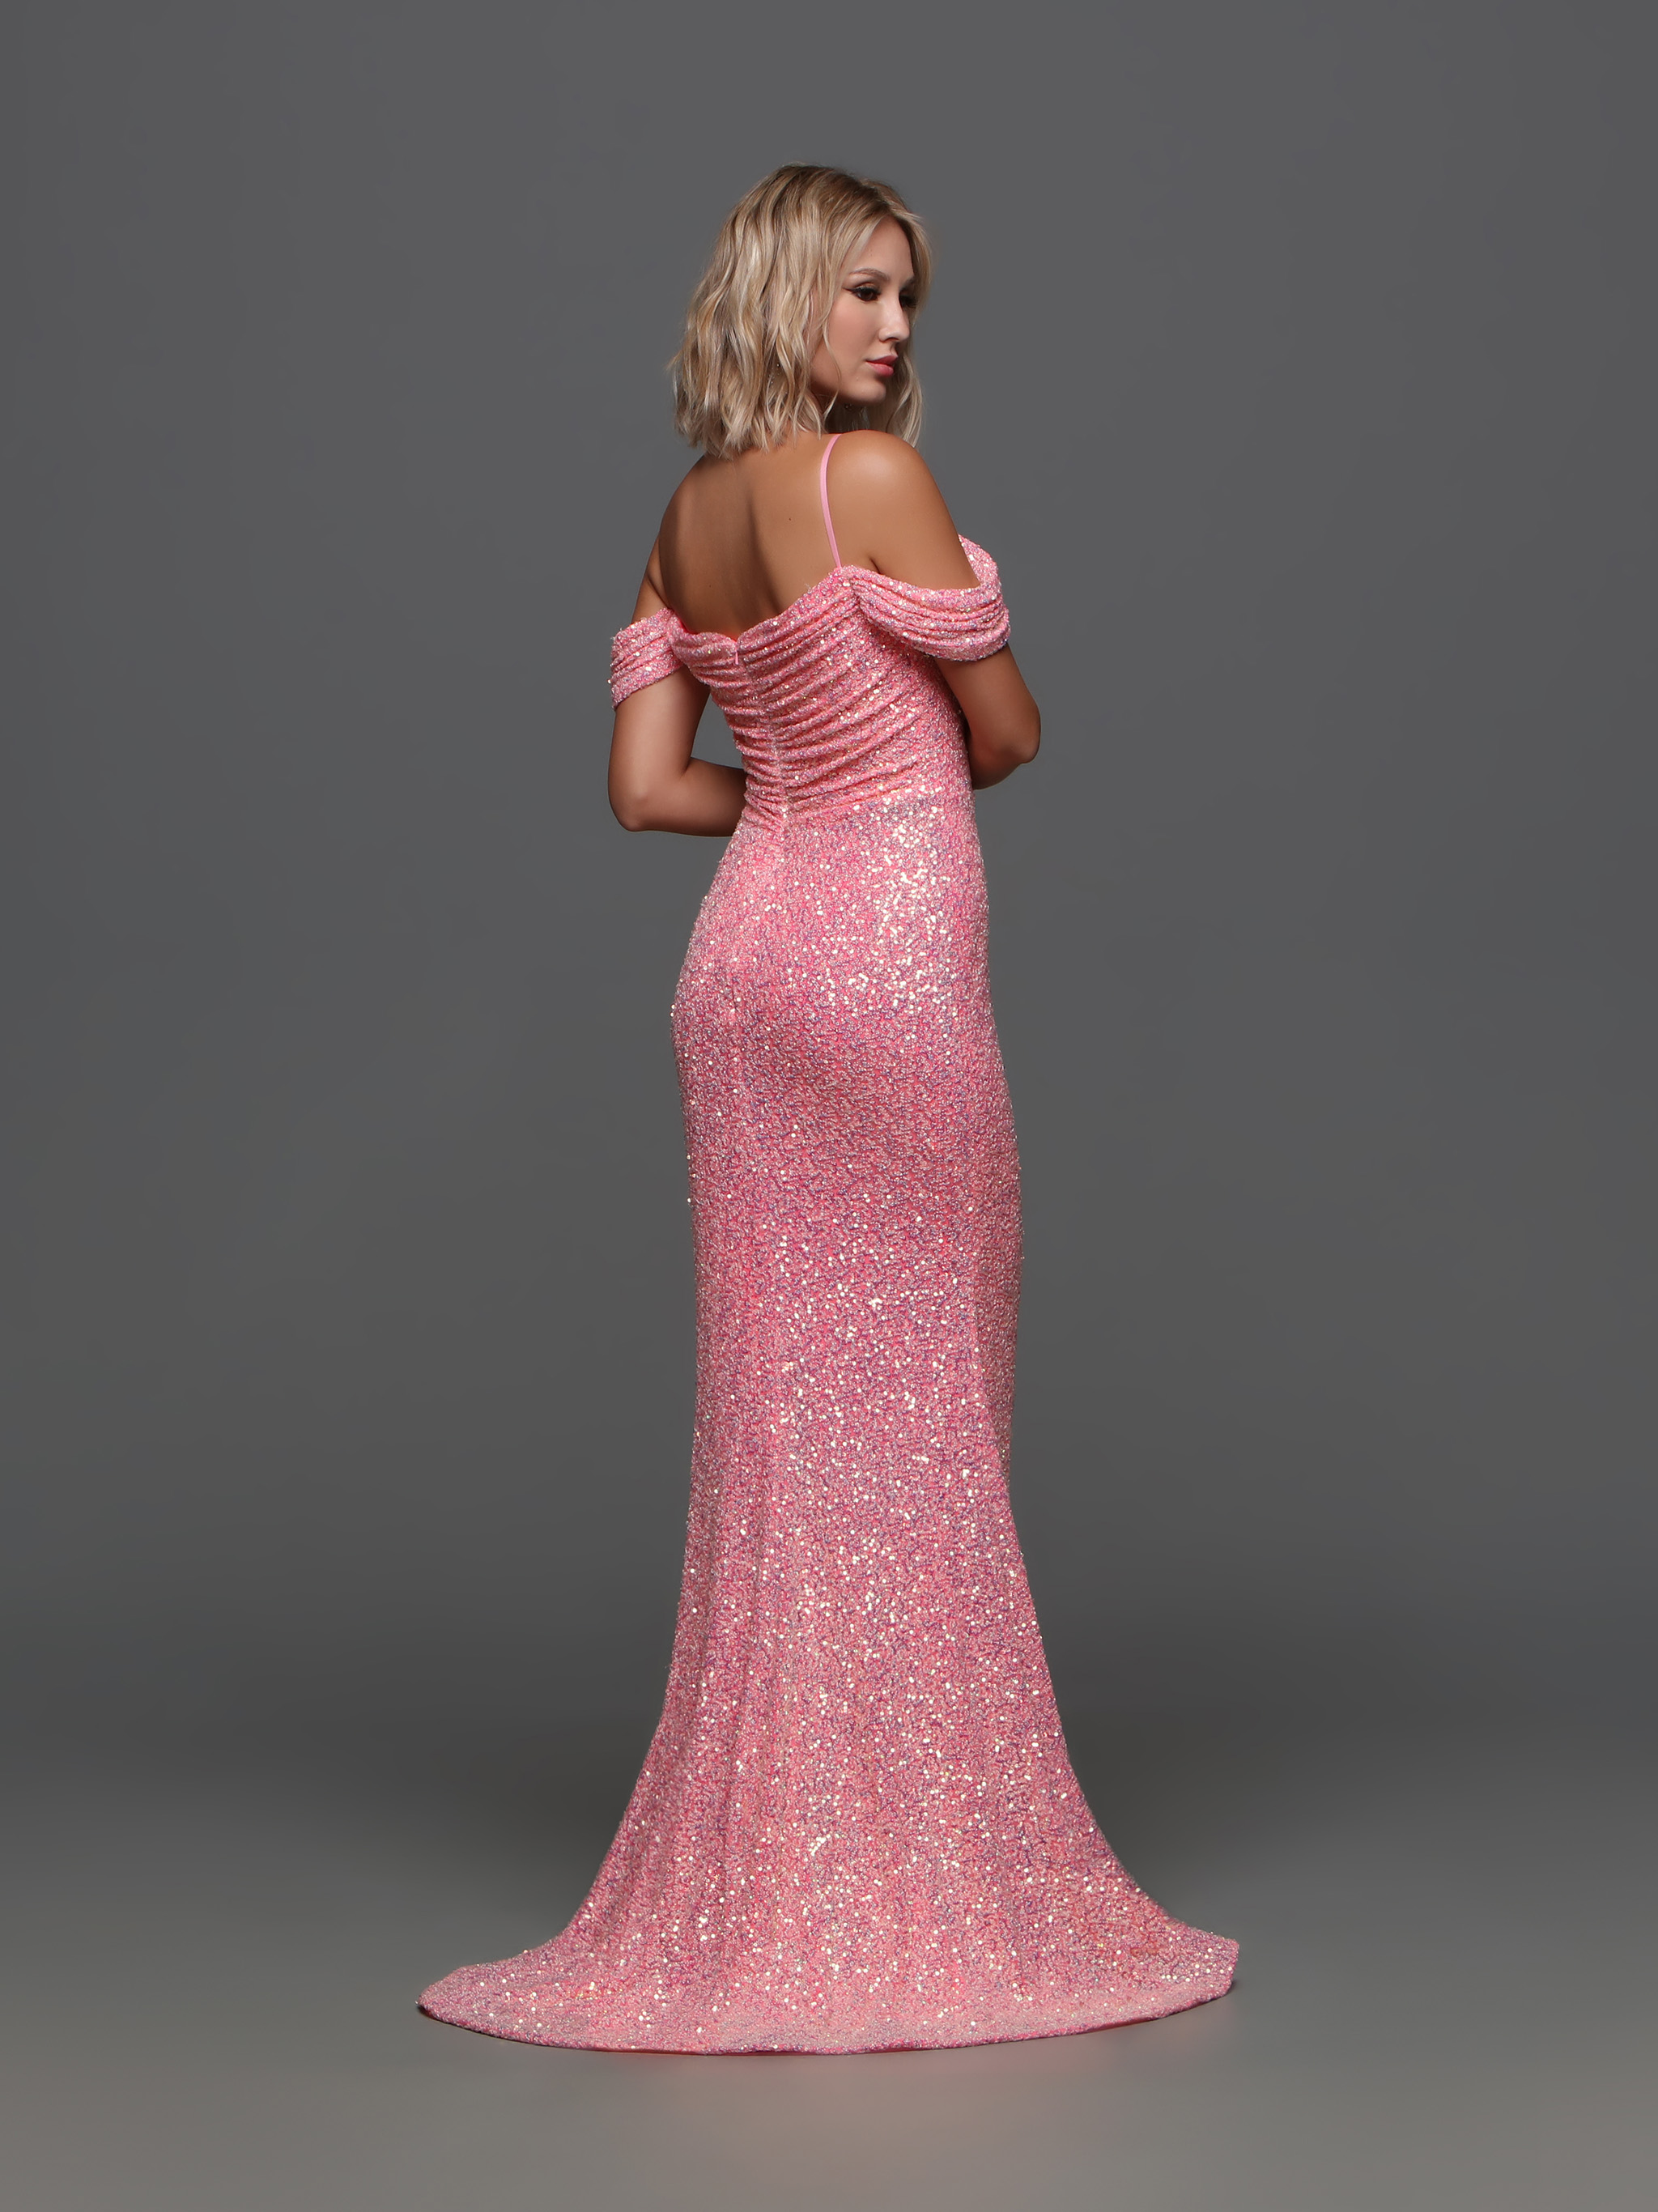 Image showing back view of style #72335